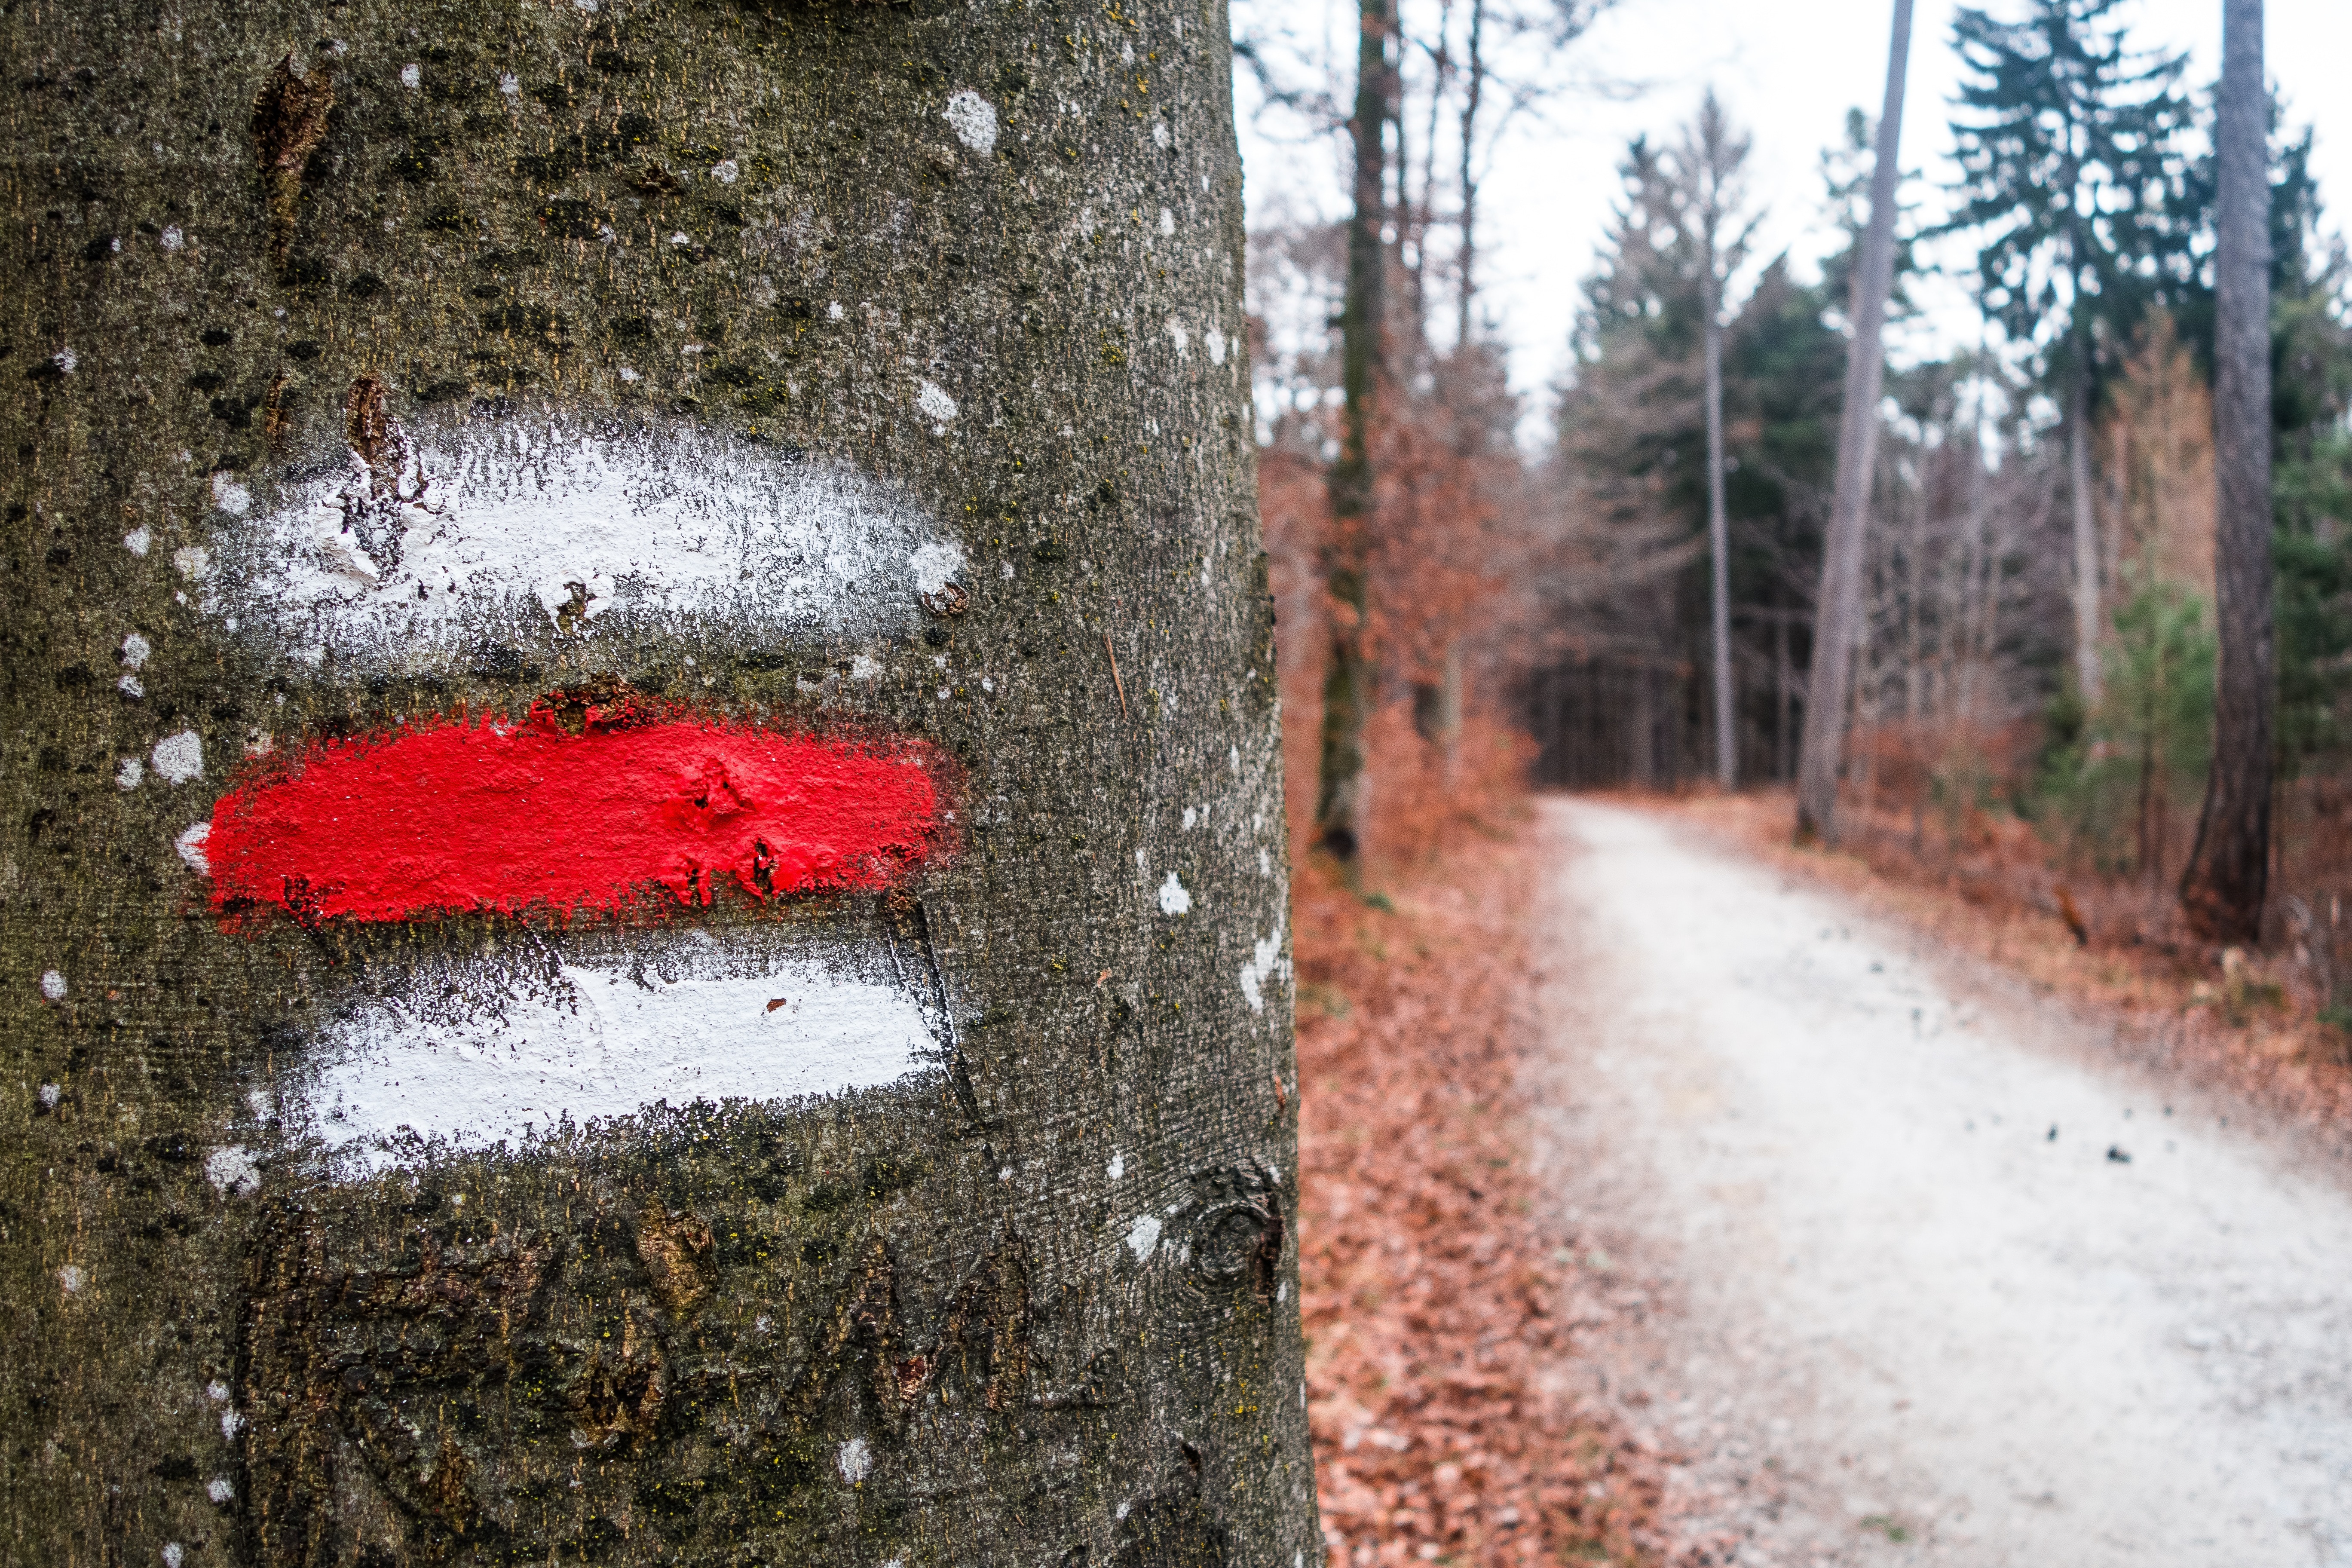 red and white paint spray marked on tree trunk